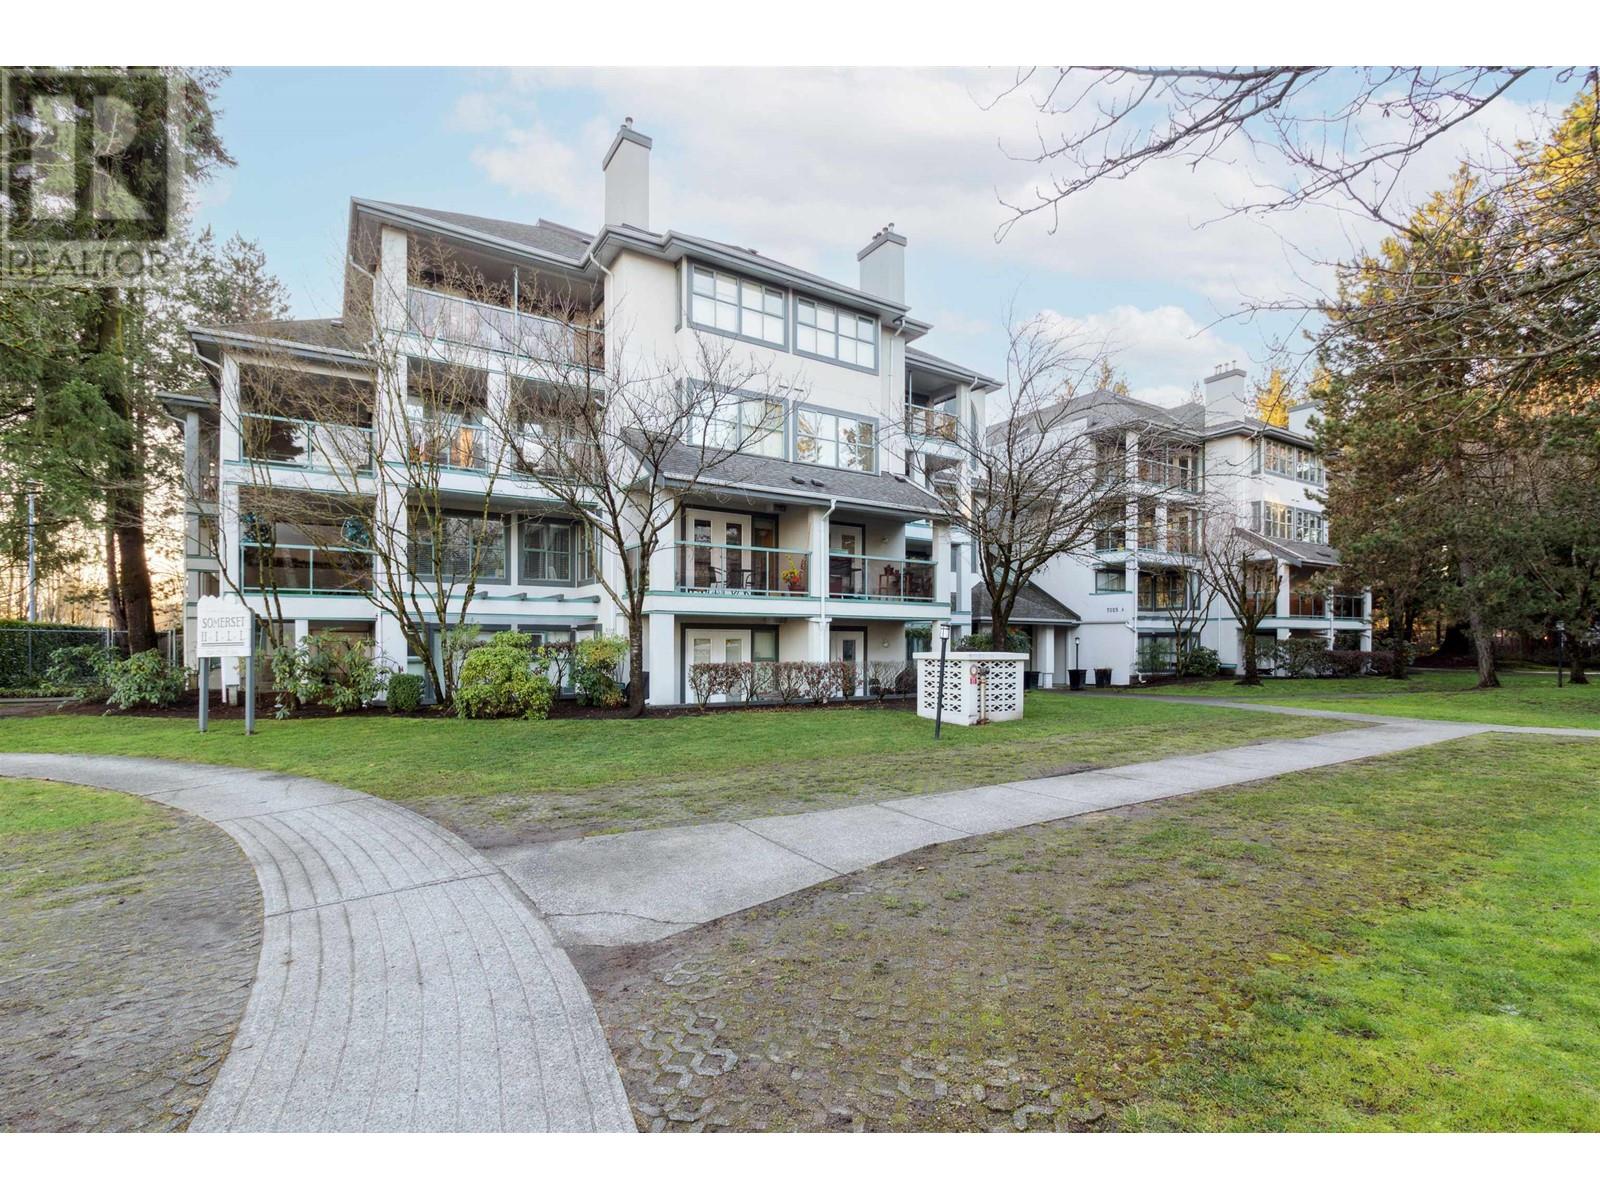 For sale: 203A 7025 STRIDE AVENUE, Burnaby, British Columbia